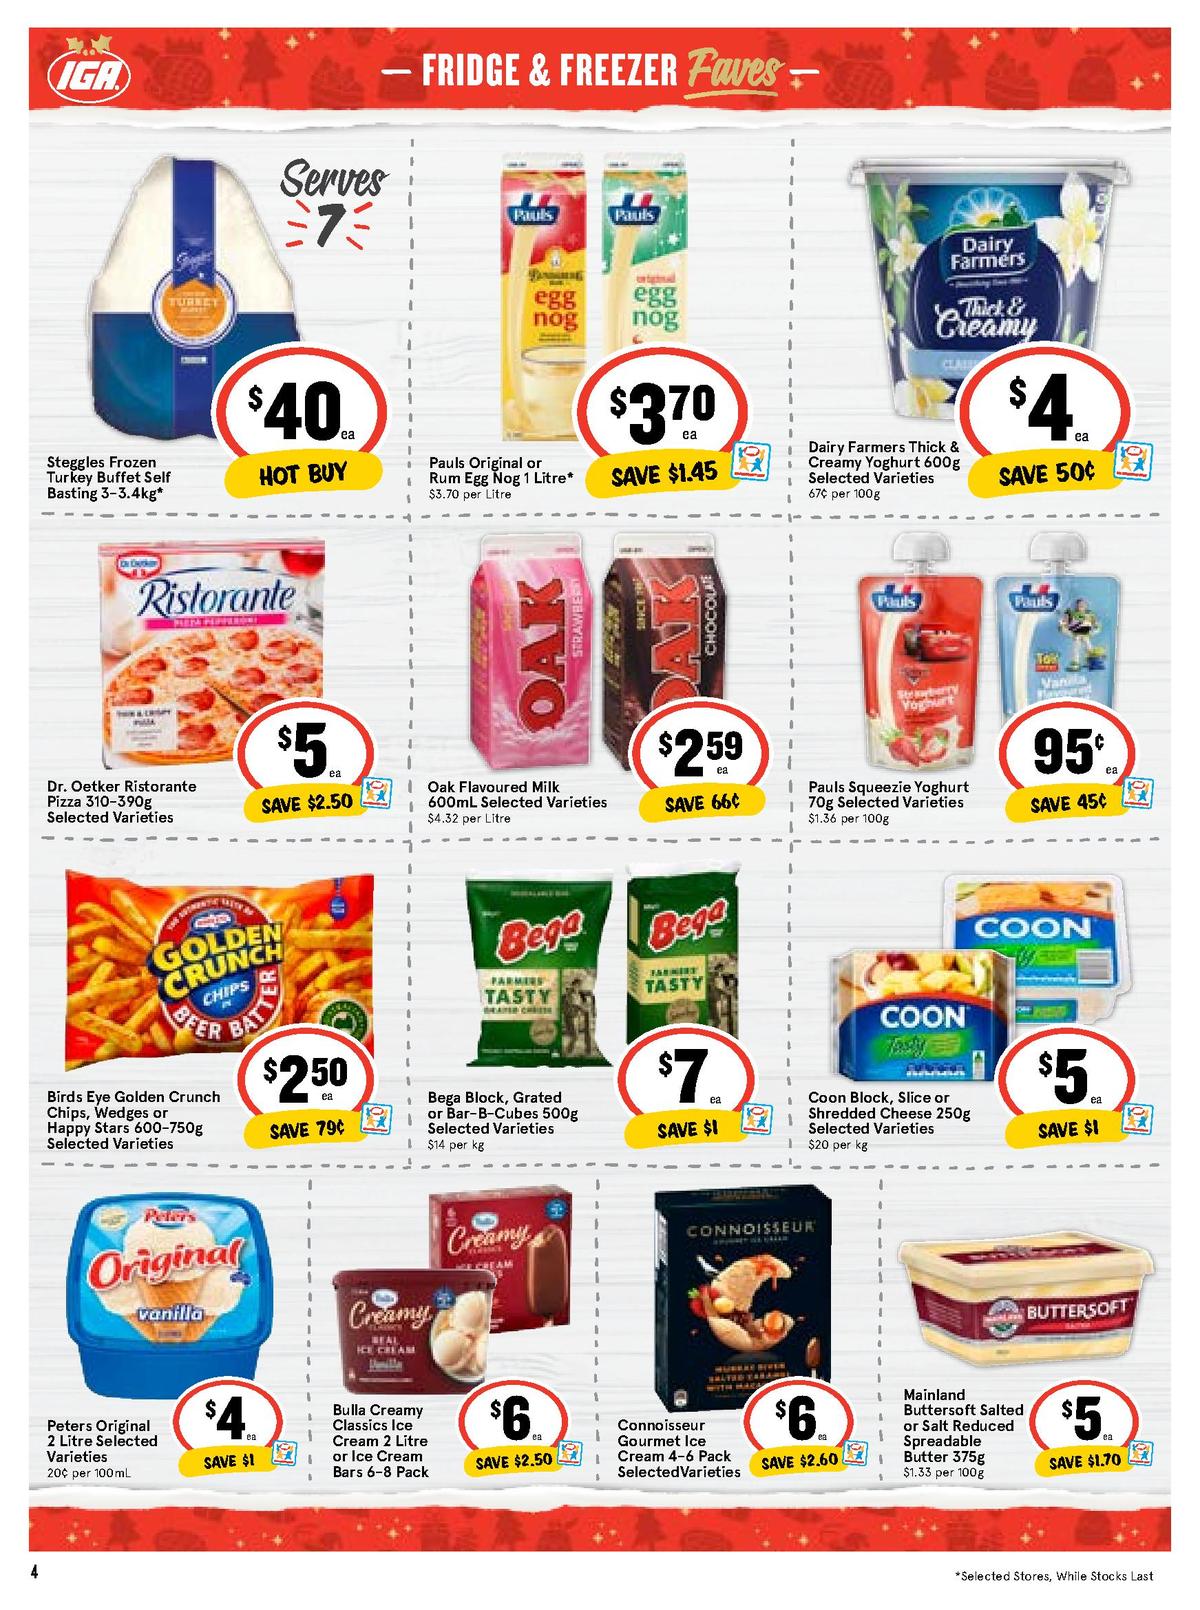 IGA Catalogues from 11 December